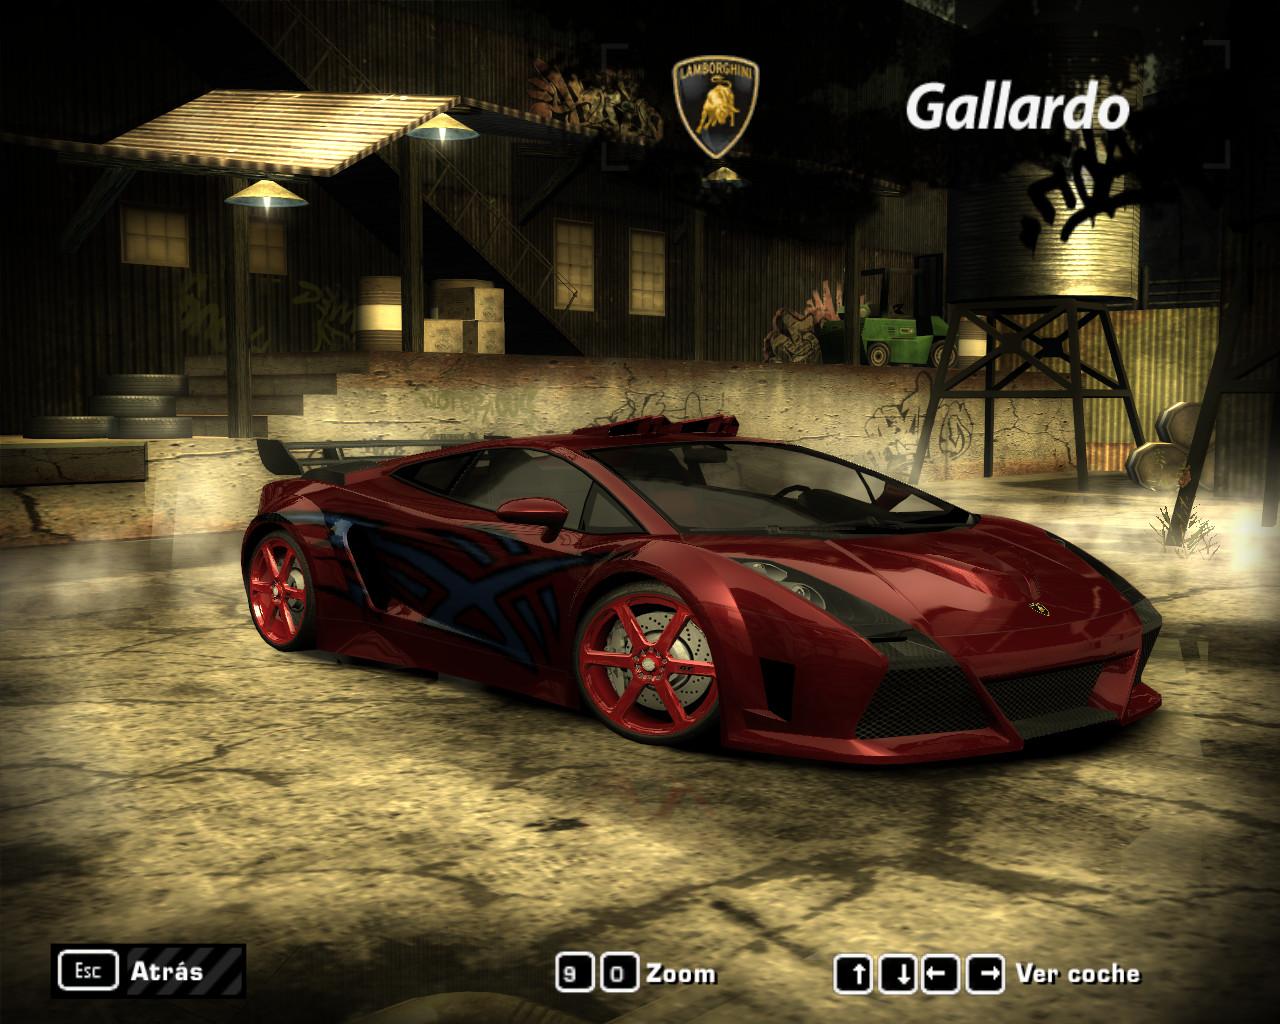 Games Background In High Quality: Nfs Most Wanted